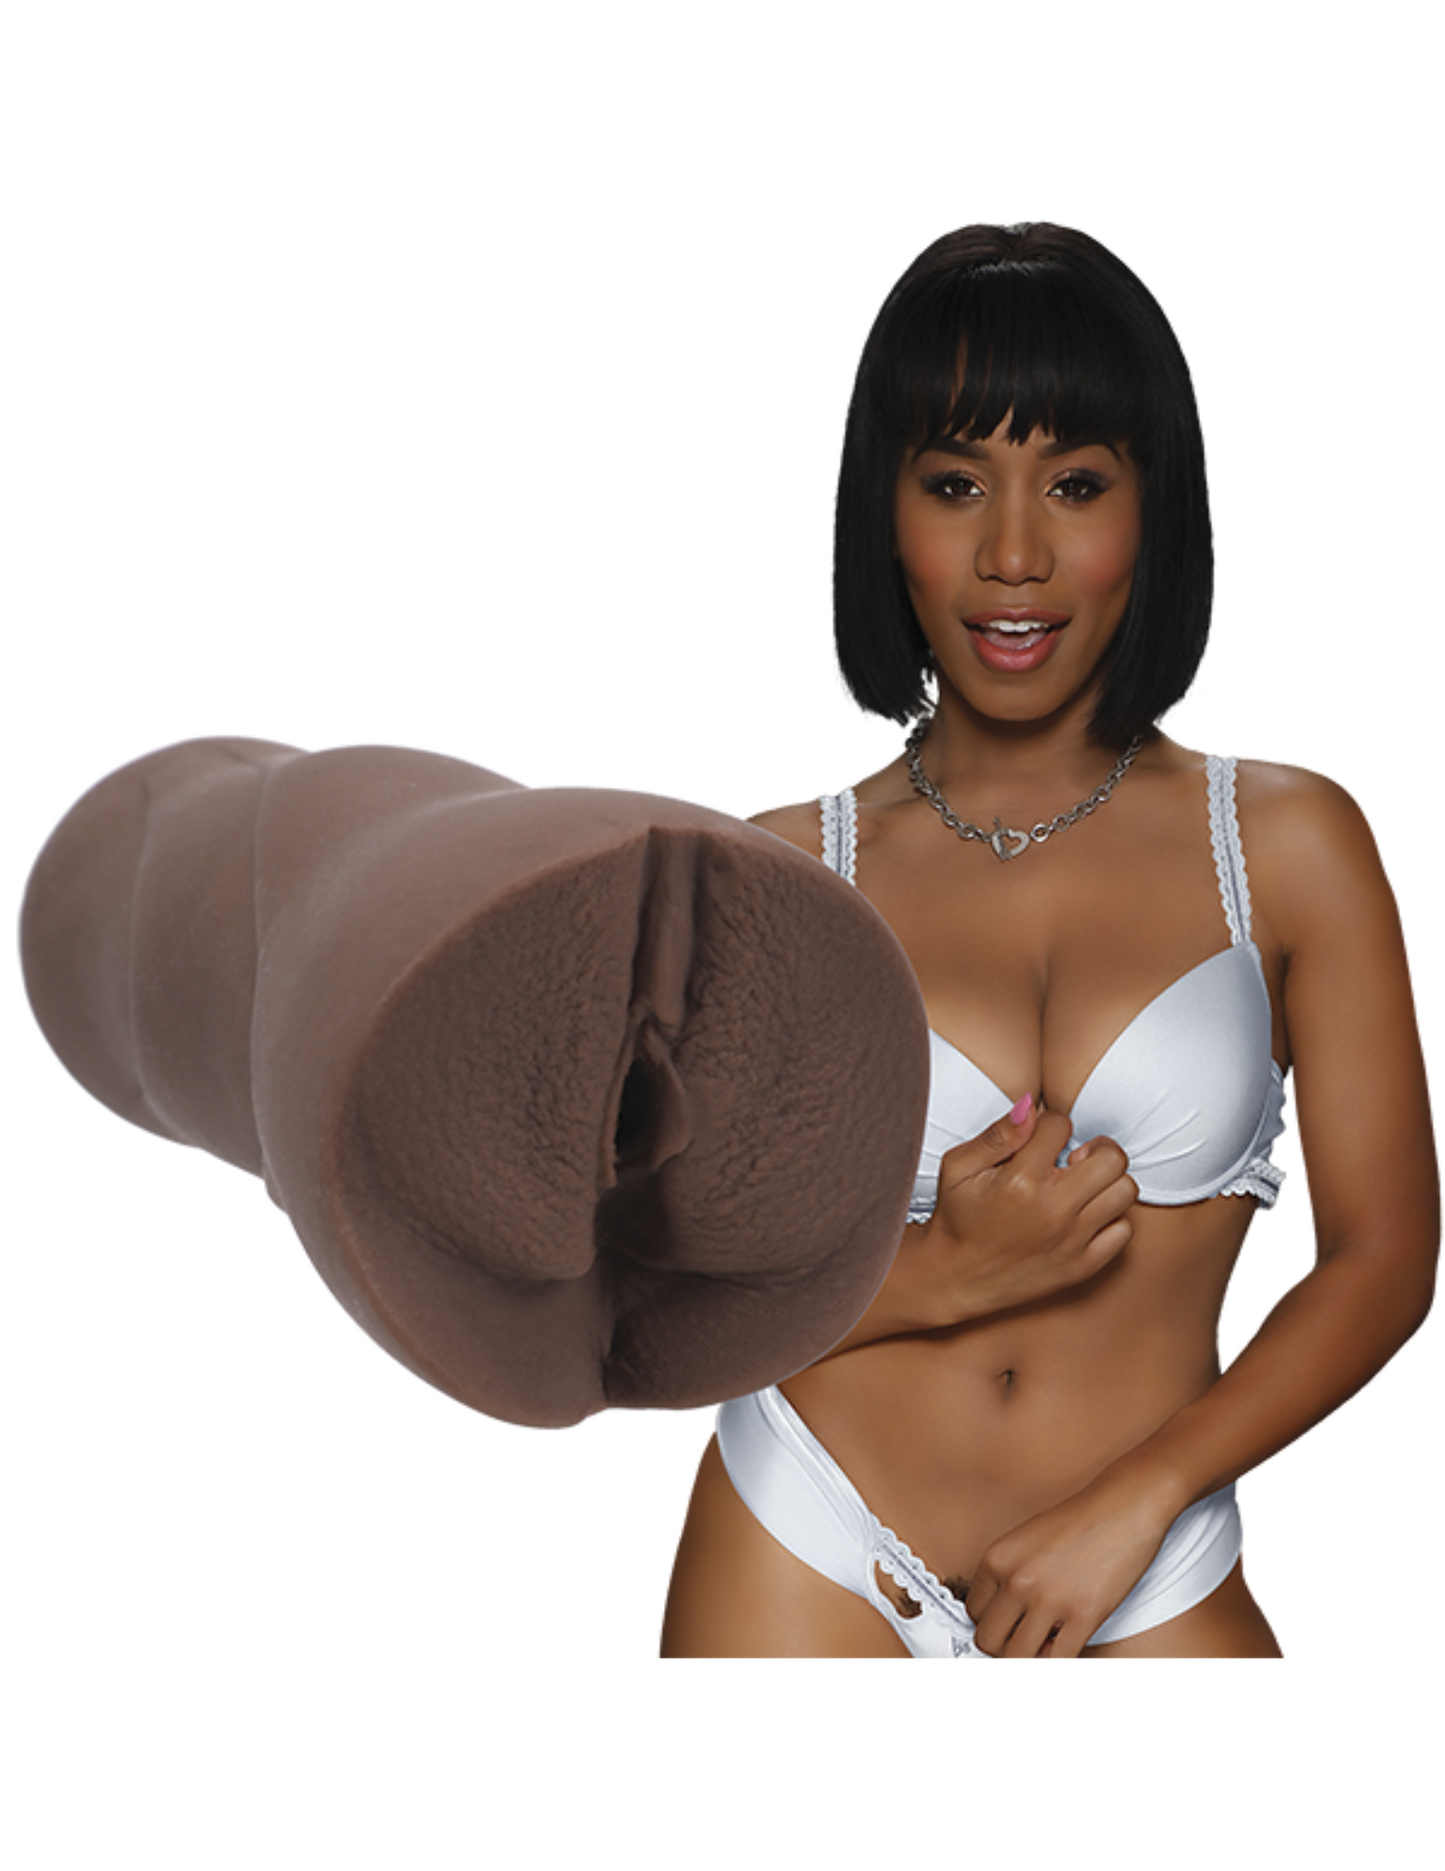 Photo of performer and toy: Signature Stroker- Jenna Foxxx Pocket Pussy by Doc Johnson.